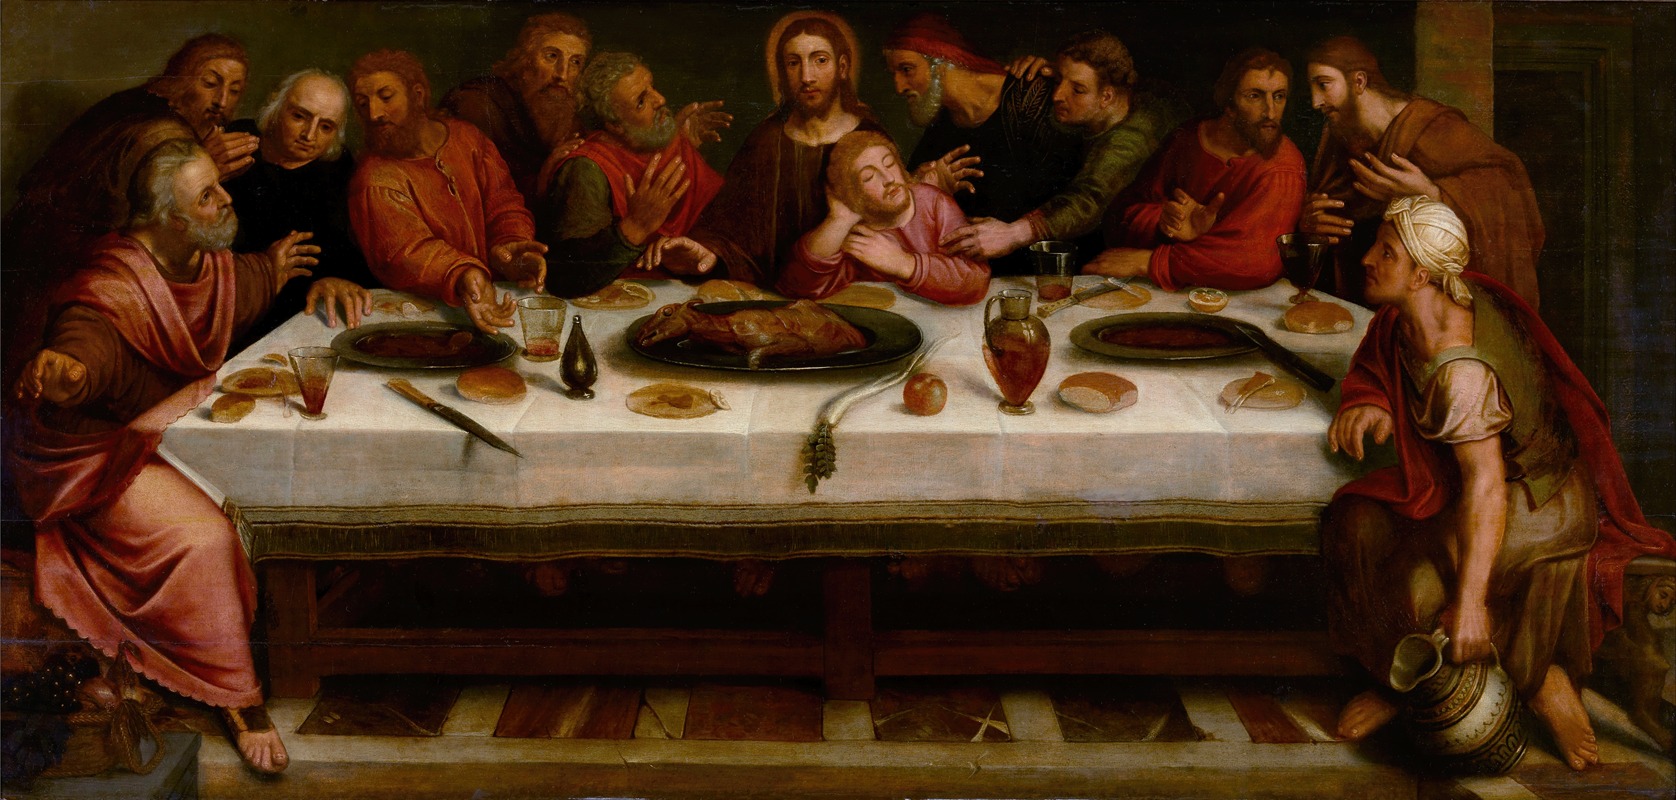 Willem Key - The Last Supper